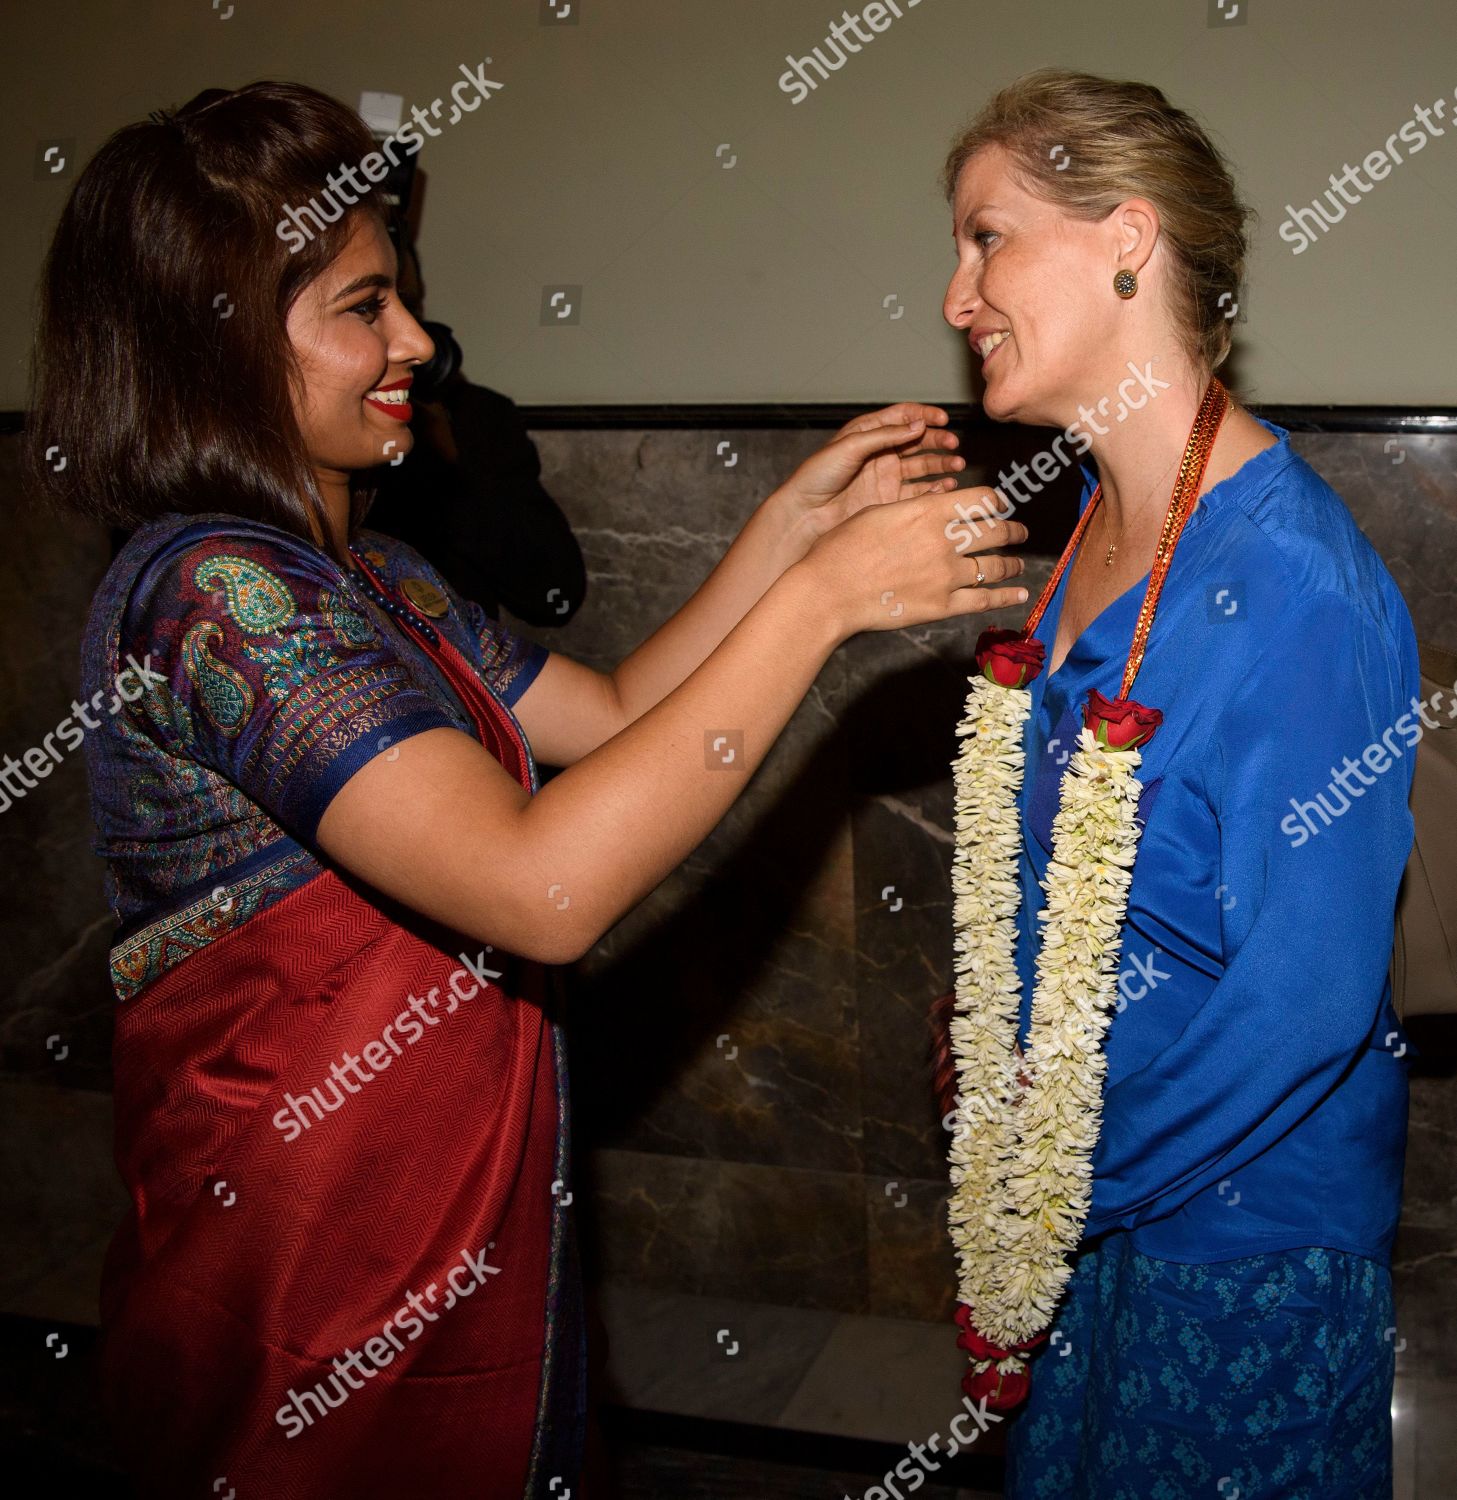 sophie-countess-of-wessex-visit-to-india-shutterstock-editorial-10222586bp.jpg